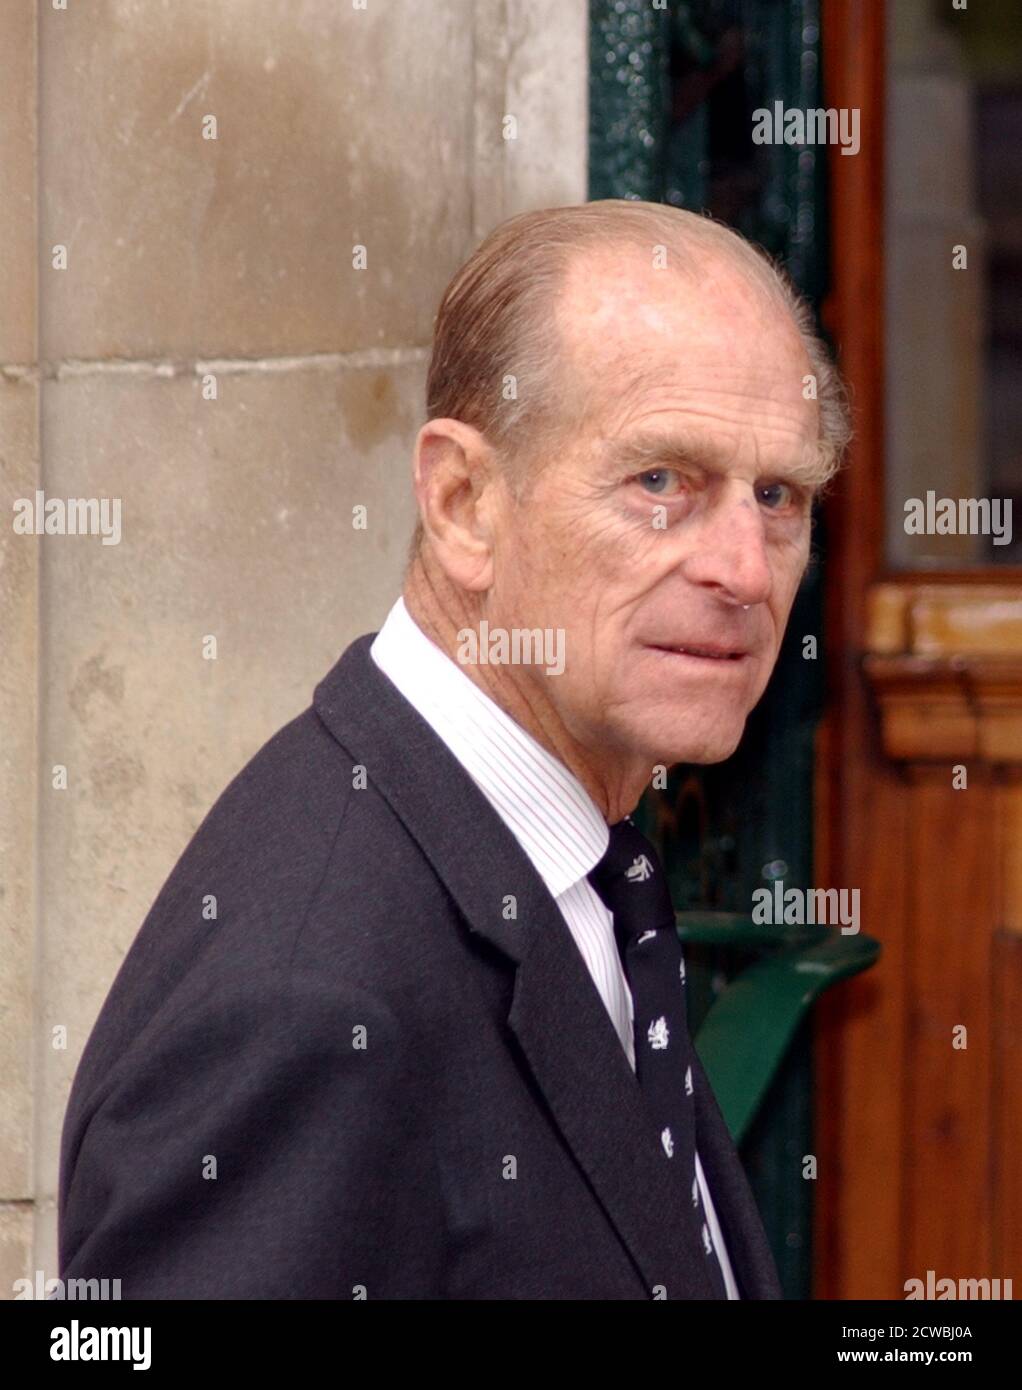 Photograph of Prince Philip, Duke of Edinburgh (1921-) the husband of Queen Elizabeth II of the United Kingdom and other Commonwealth realms. Stock Photo